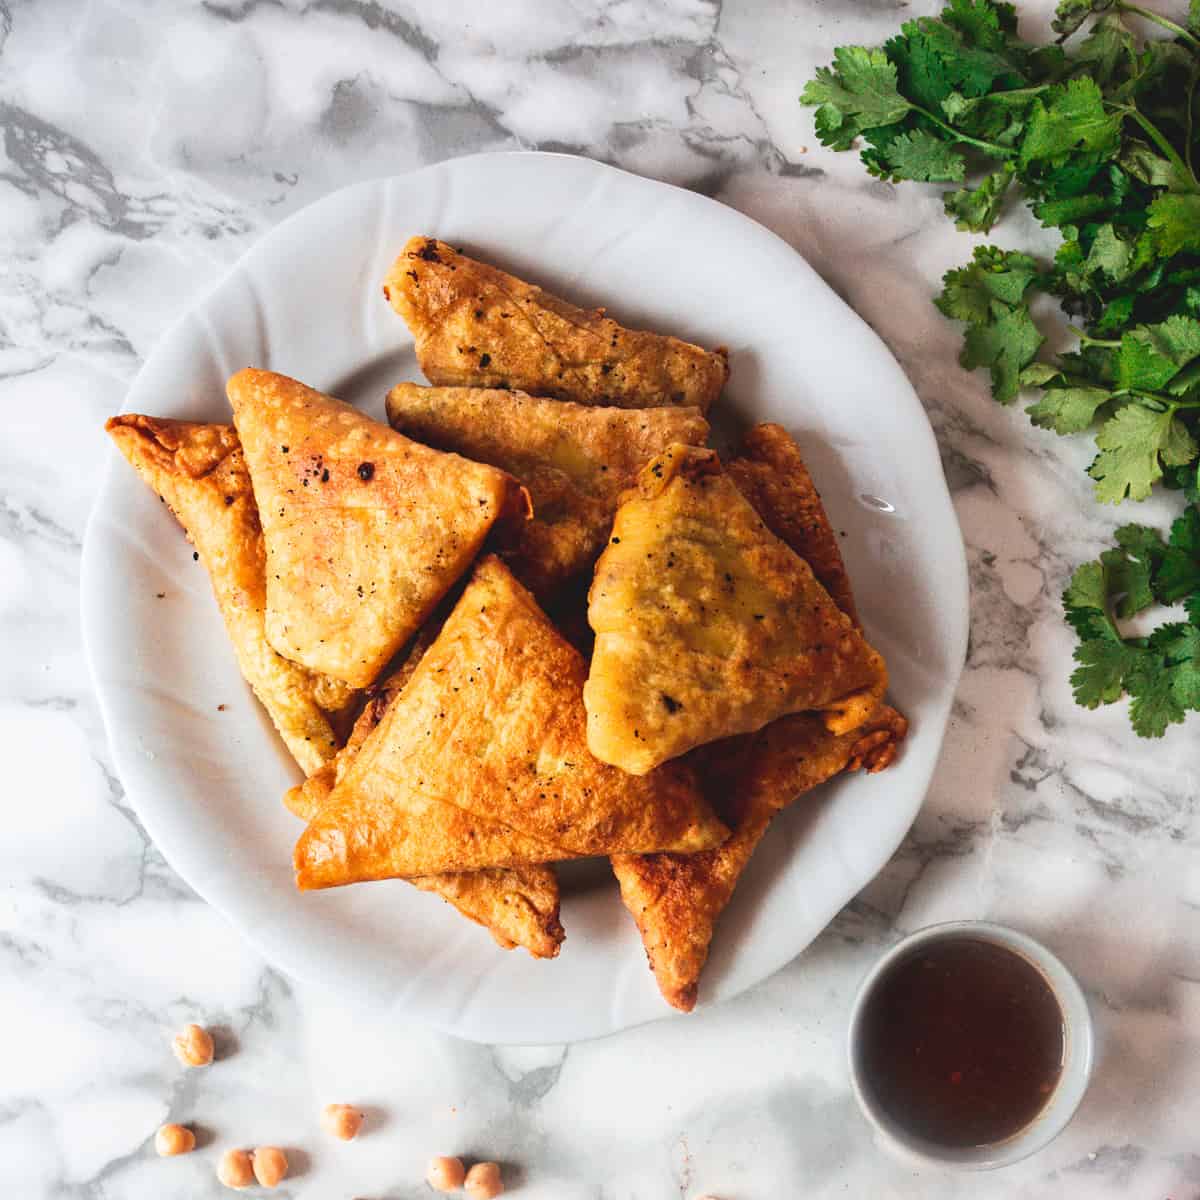 How to make easy gluten-free samosas with sweet &amp; spicy chickpea filling